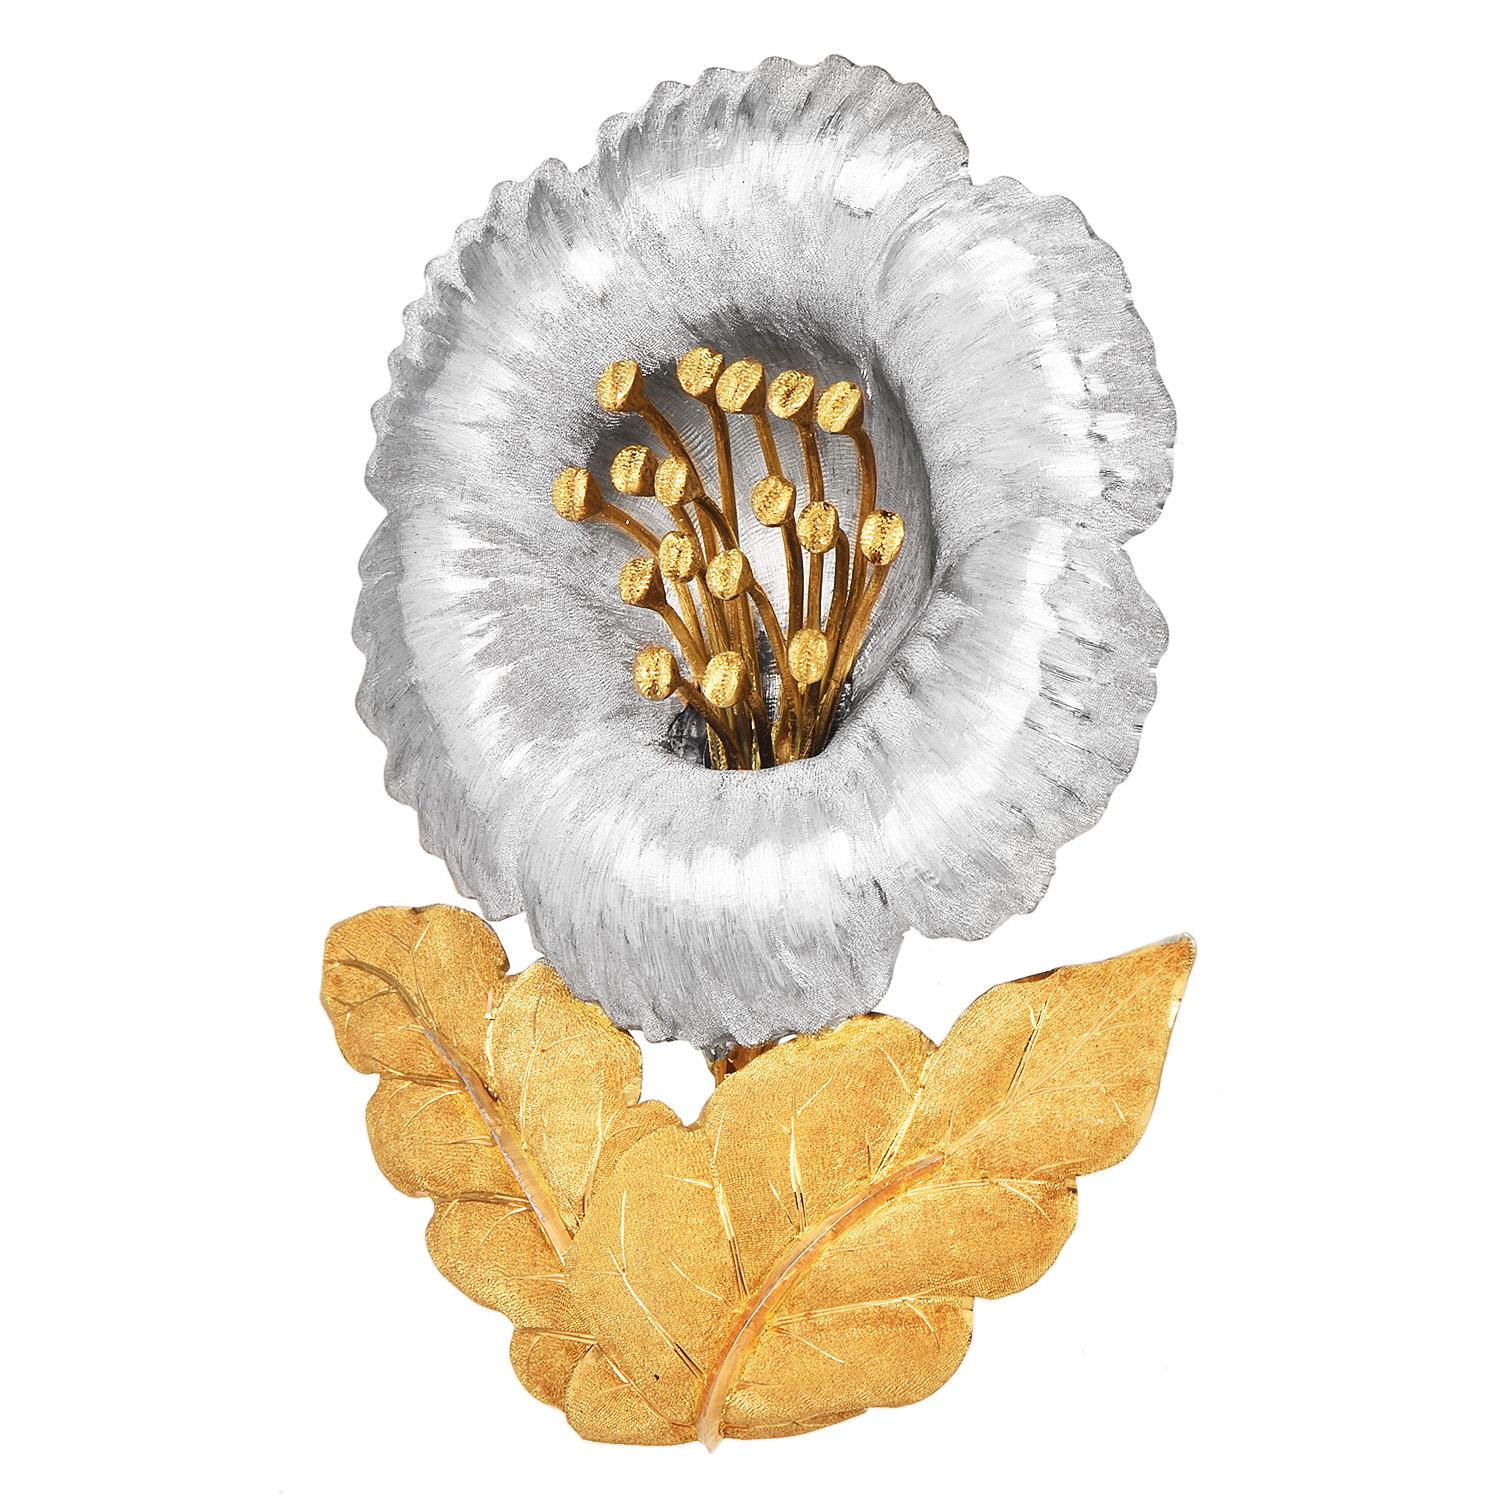 Opulent, Sophisticated, and Highly collectible describe this extraordinary Flower Buccellati Brooch. 

This piece was crafted in 29.2 Grams of luxurious 18K Yellow & White Gold, with a textured satin finish simulating the texture of a flower and its